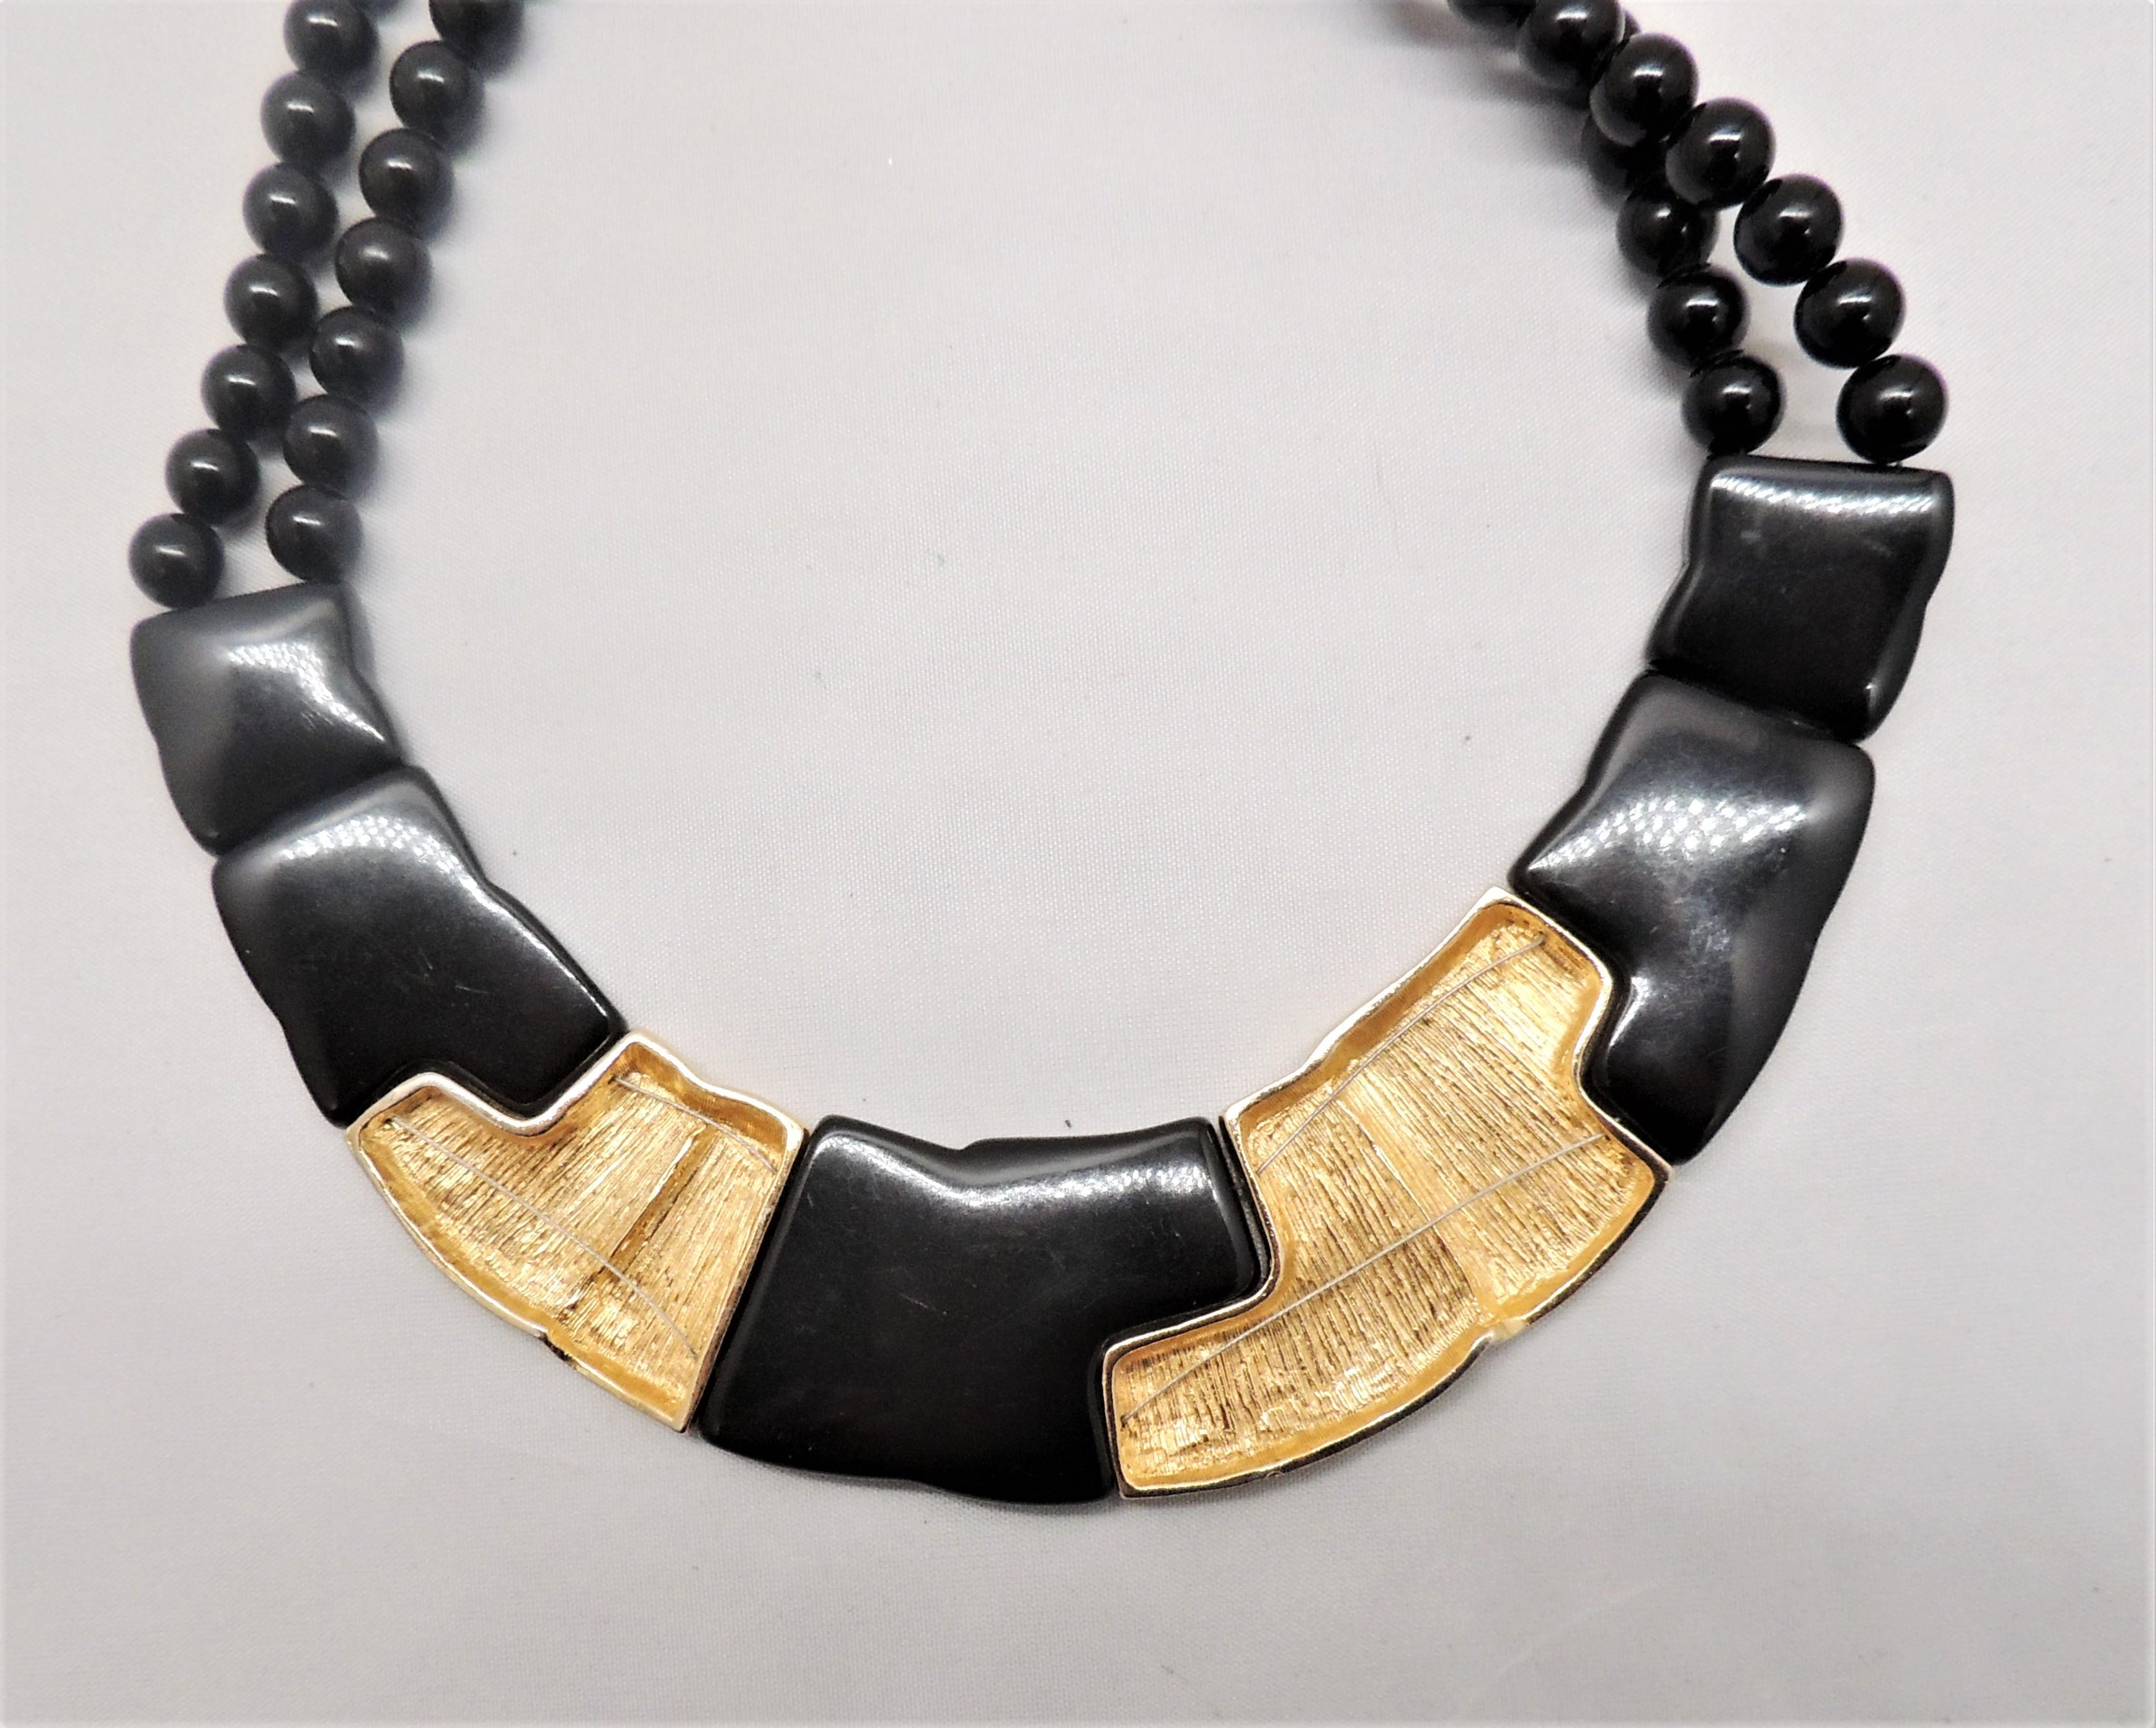 Vintage Signed Napier Black & Goldtone Puzzle Piece Collar Necklace, 1986 In Good Condition For Sale In Easton, PA